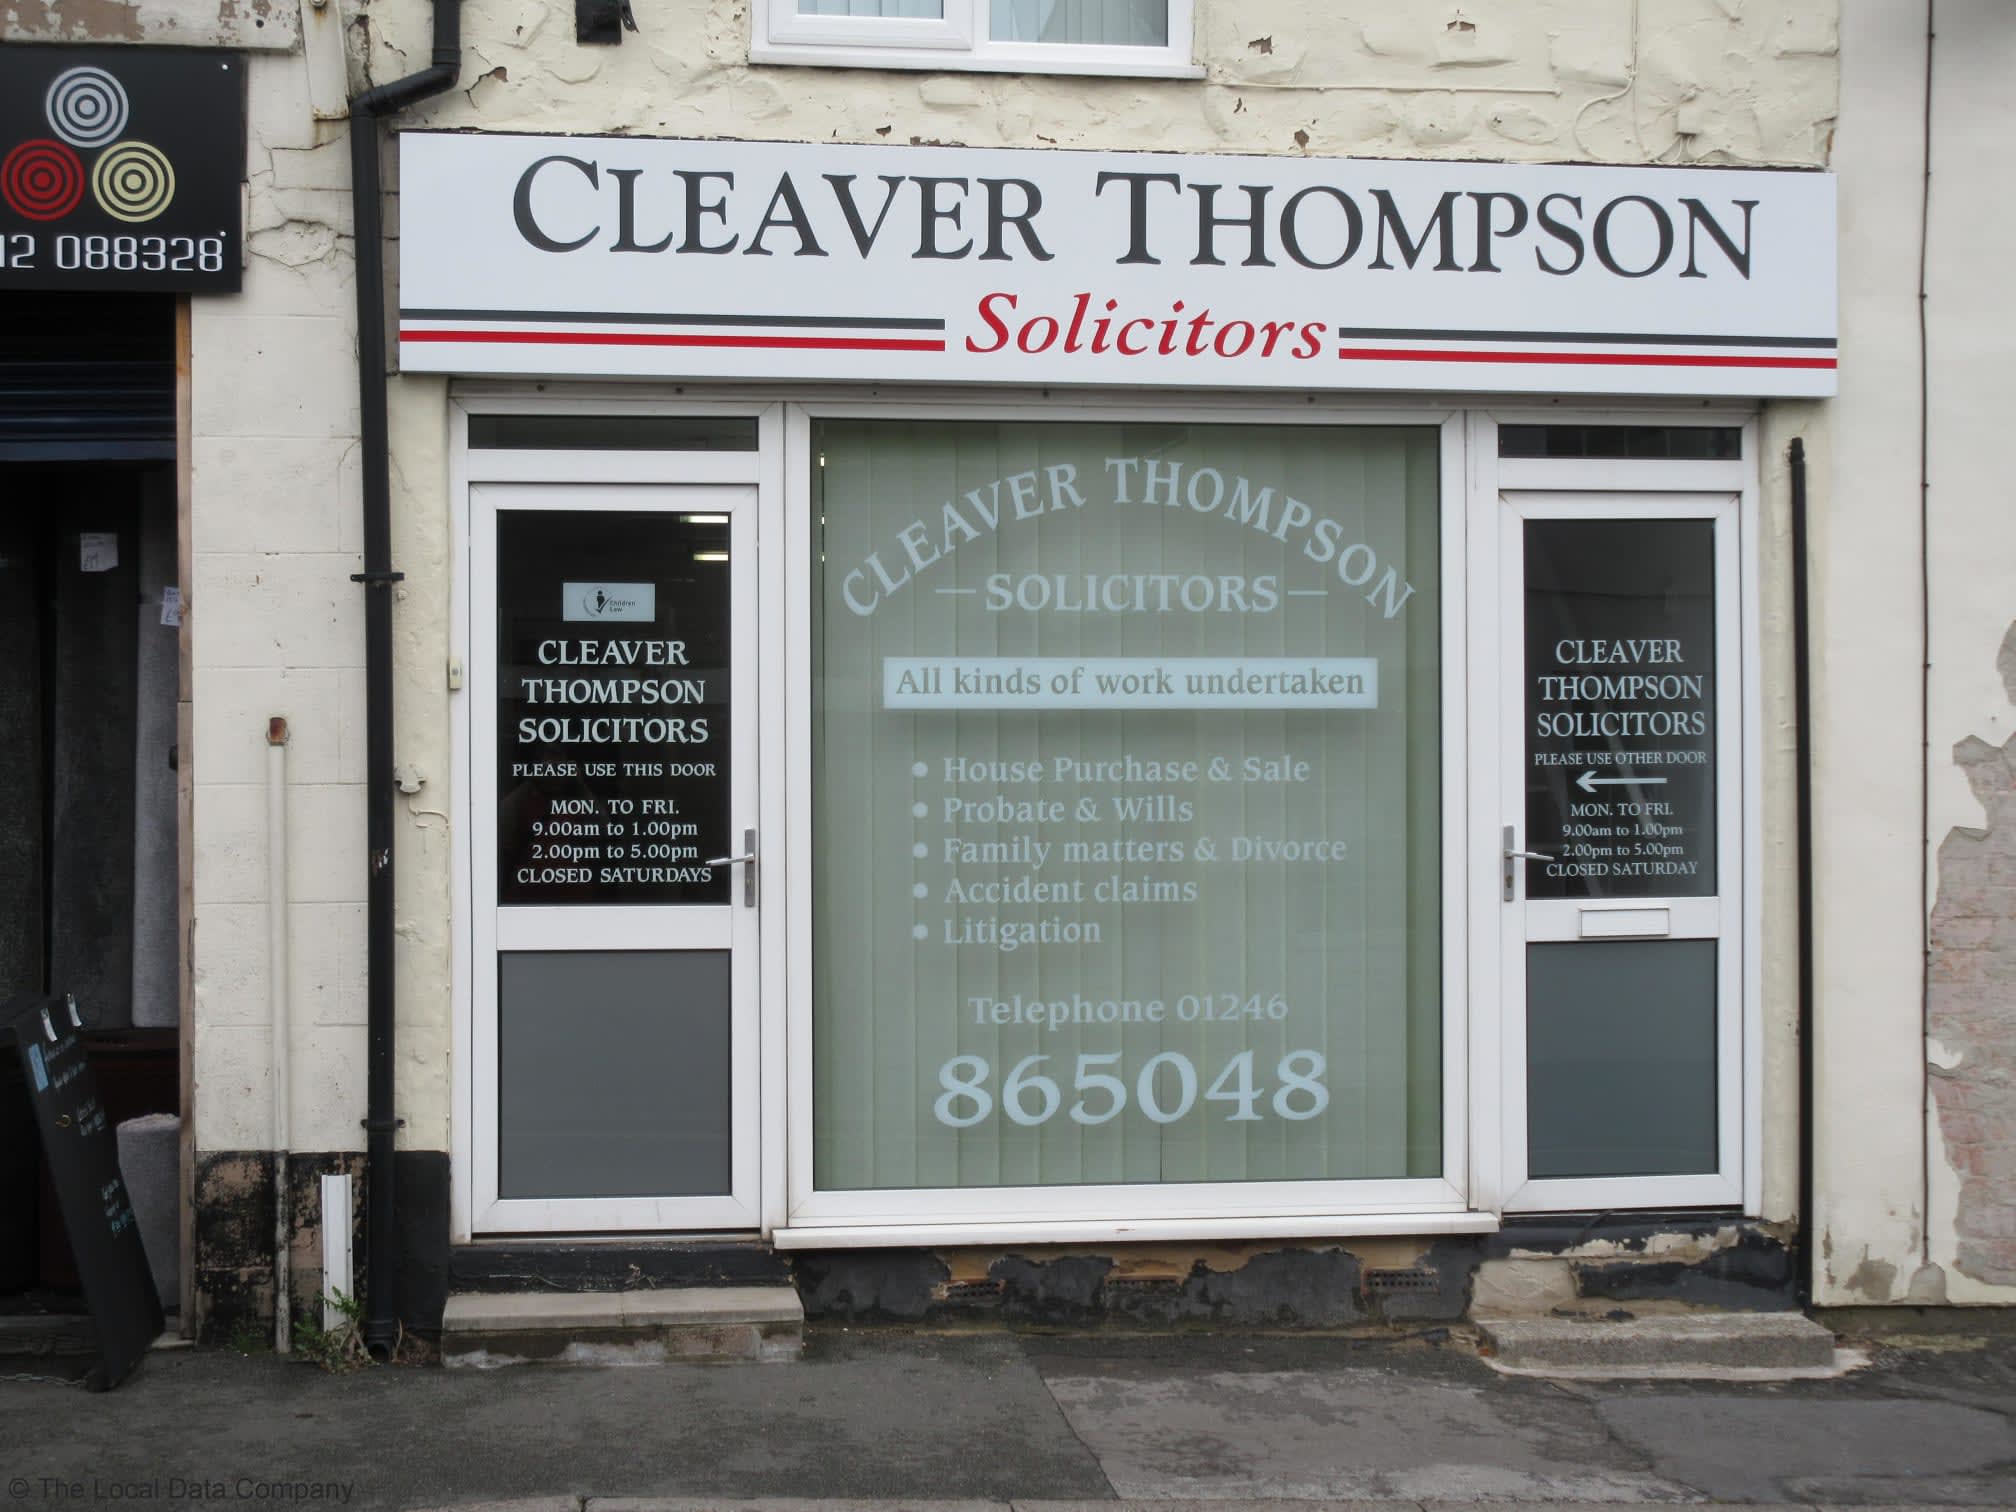 Images Cleaver Thompson Solicitors